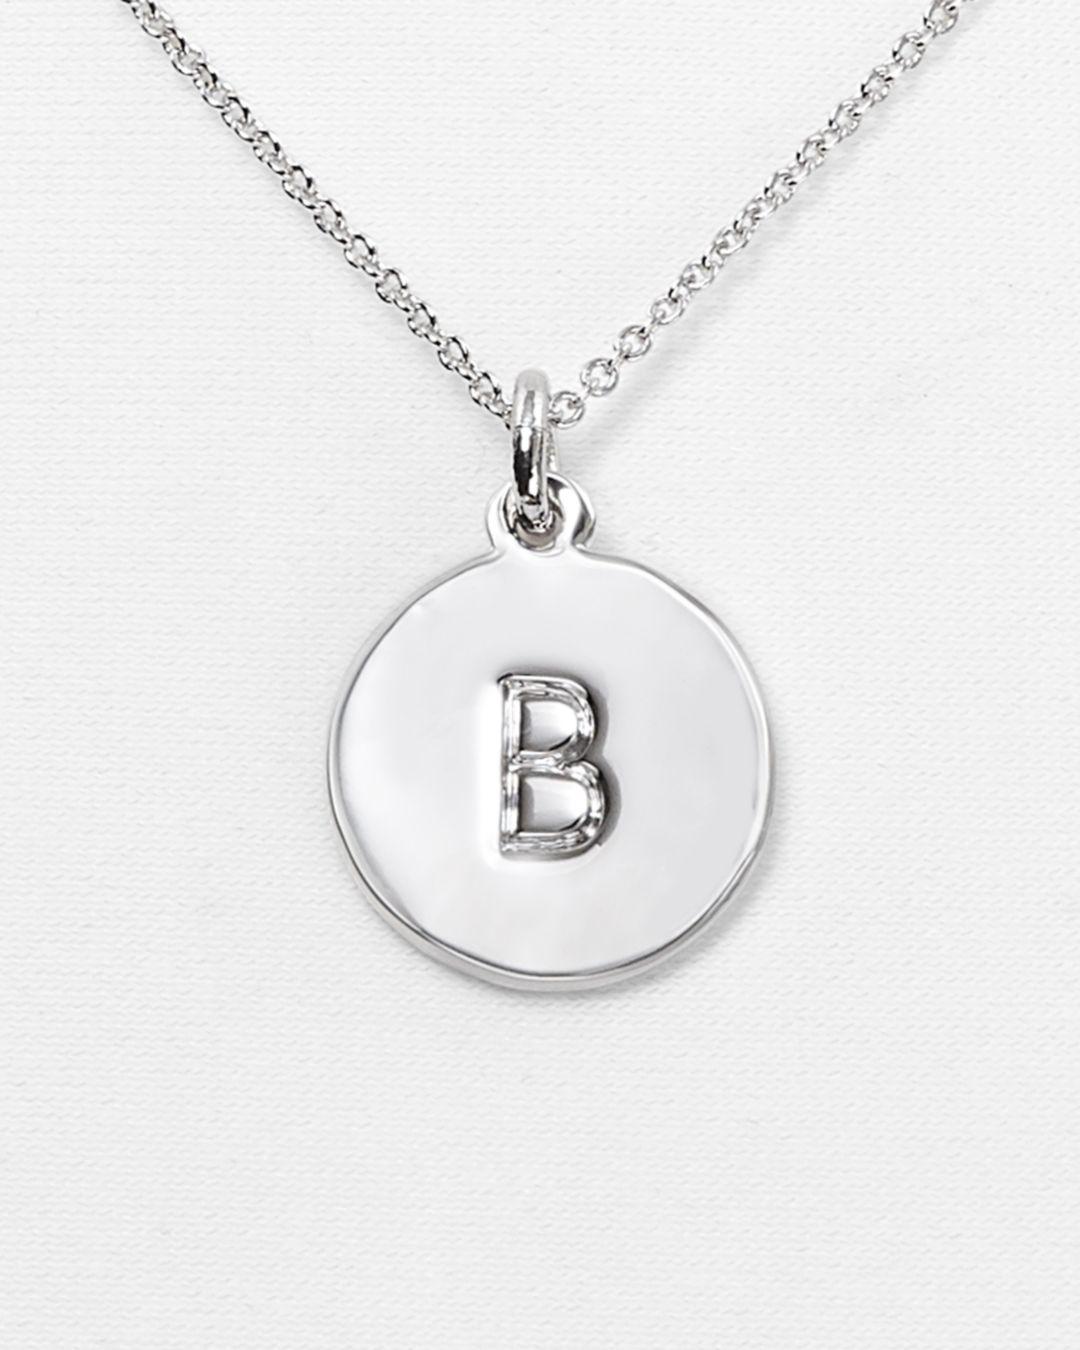 Kate Spade One In A Million Initial Pendant Necklace in b 